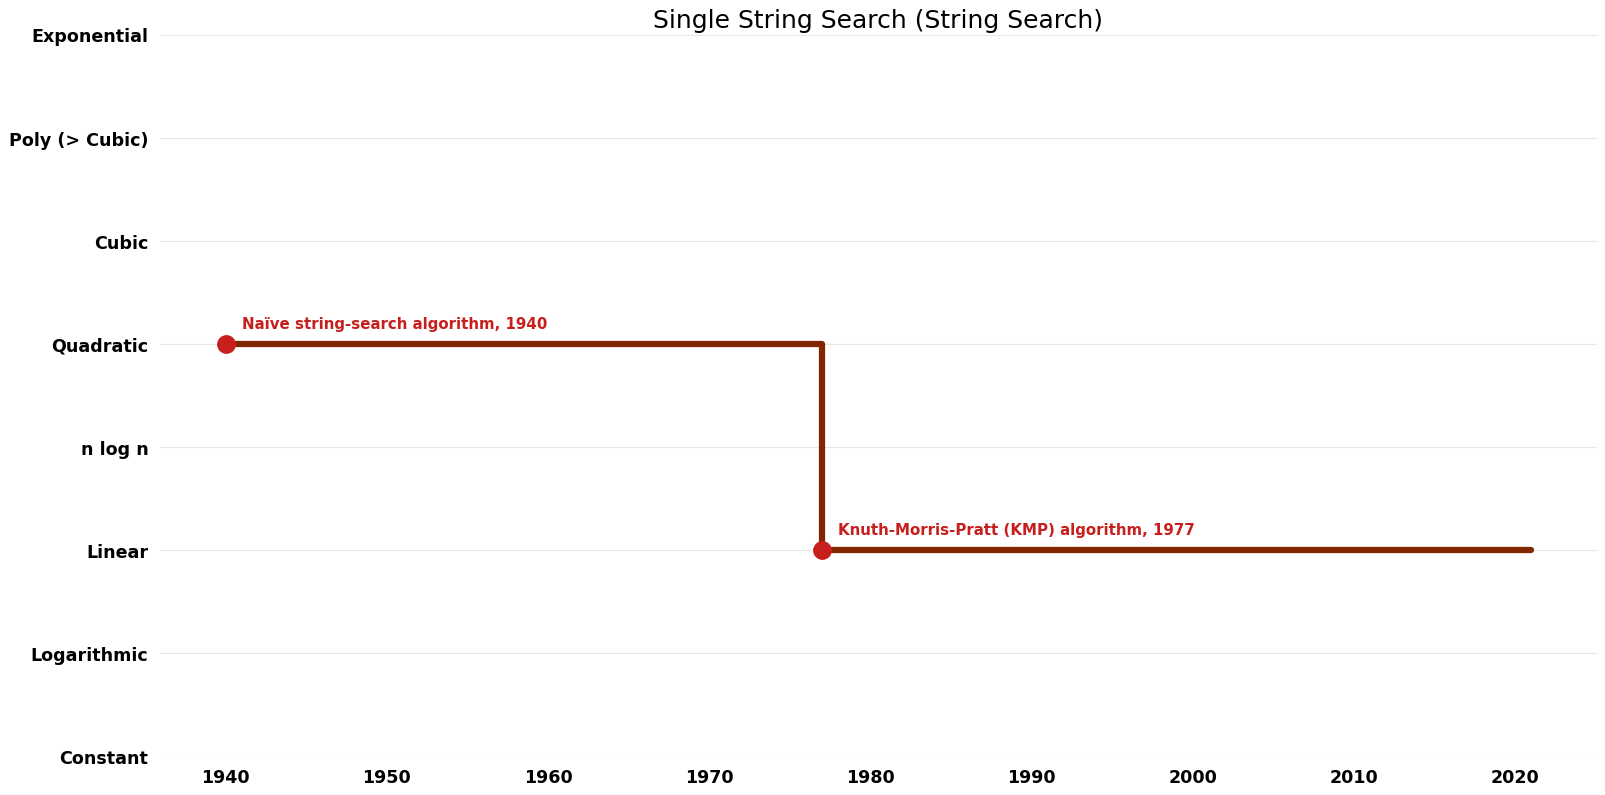 File:String Search - Single String Search - Time.png